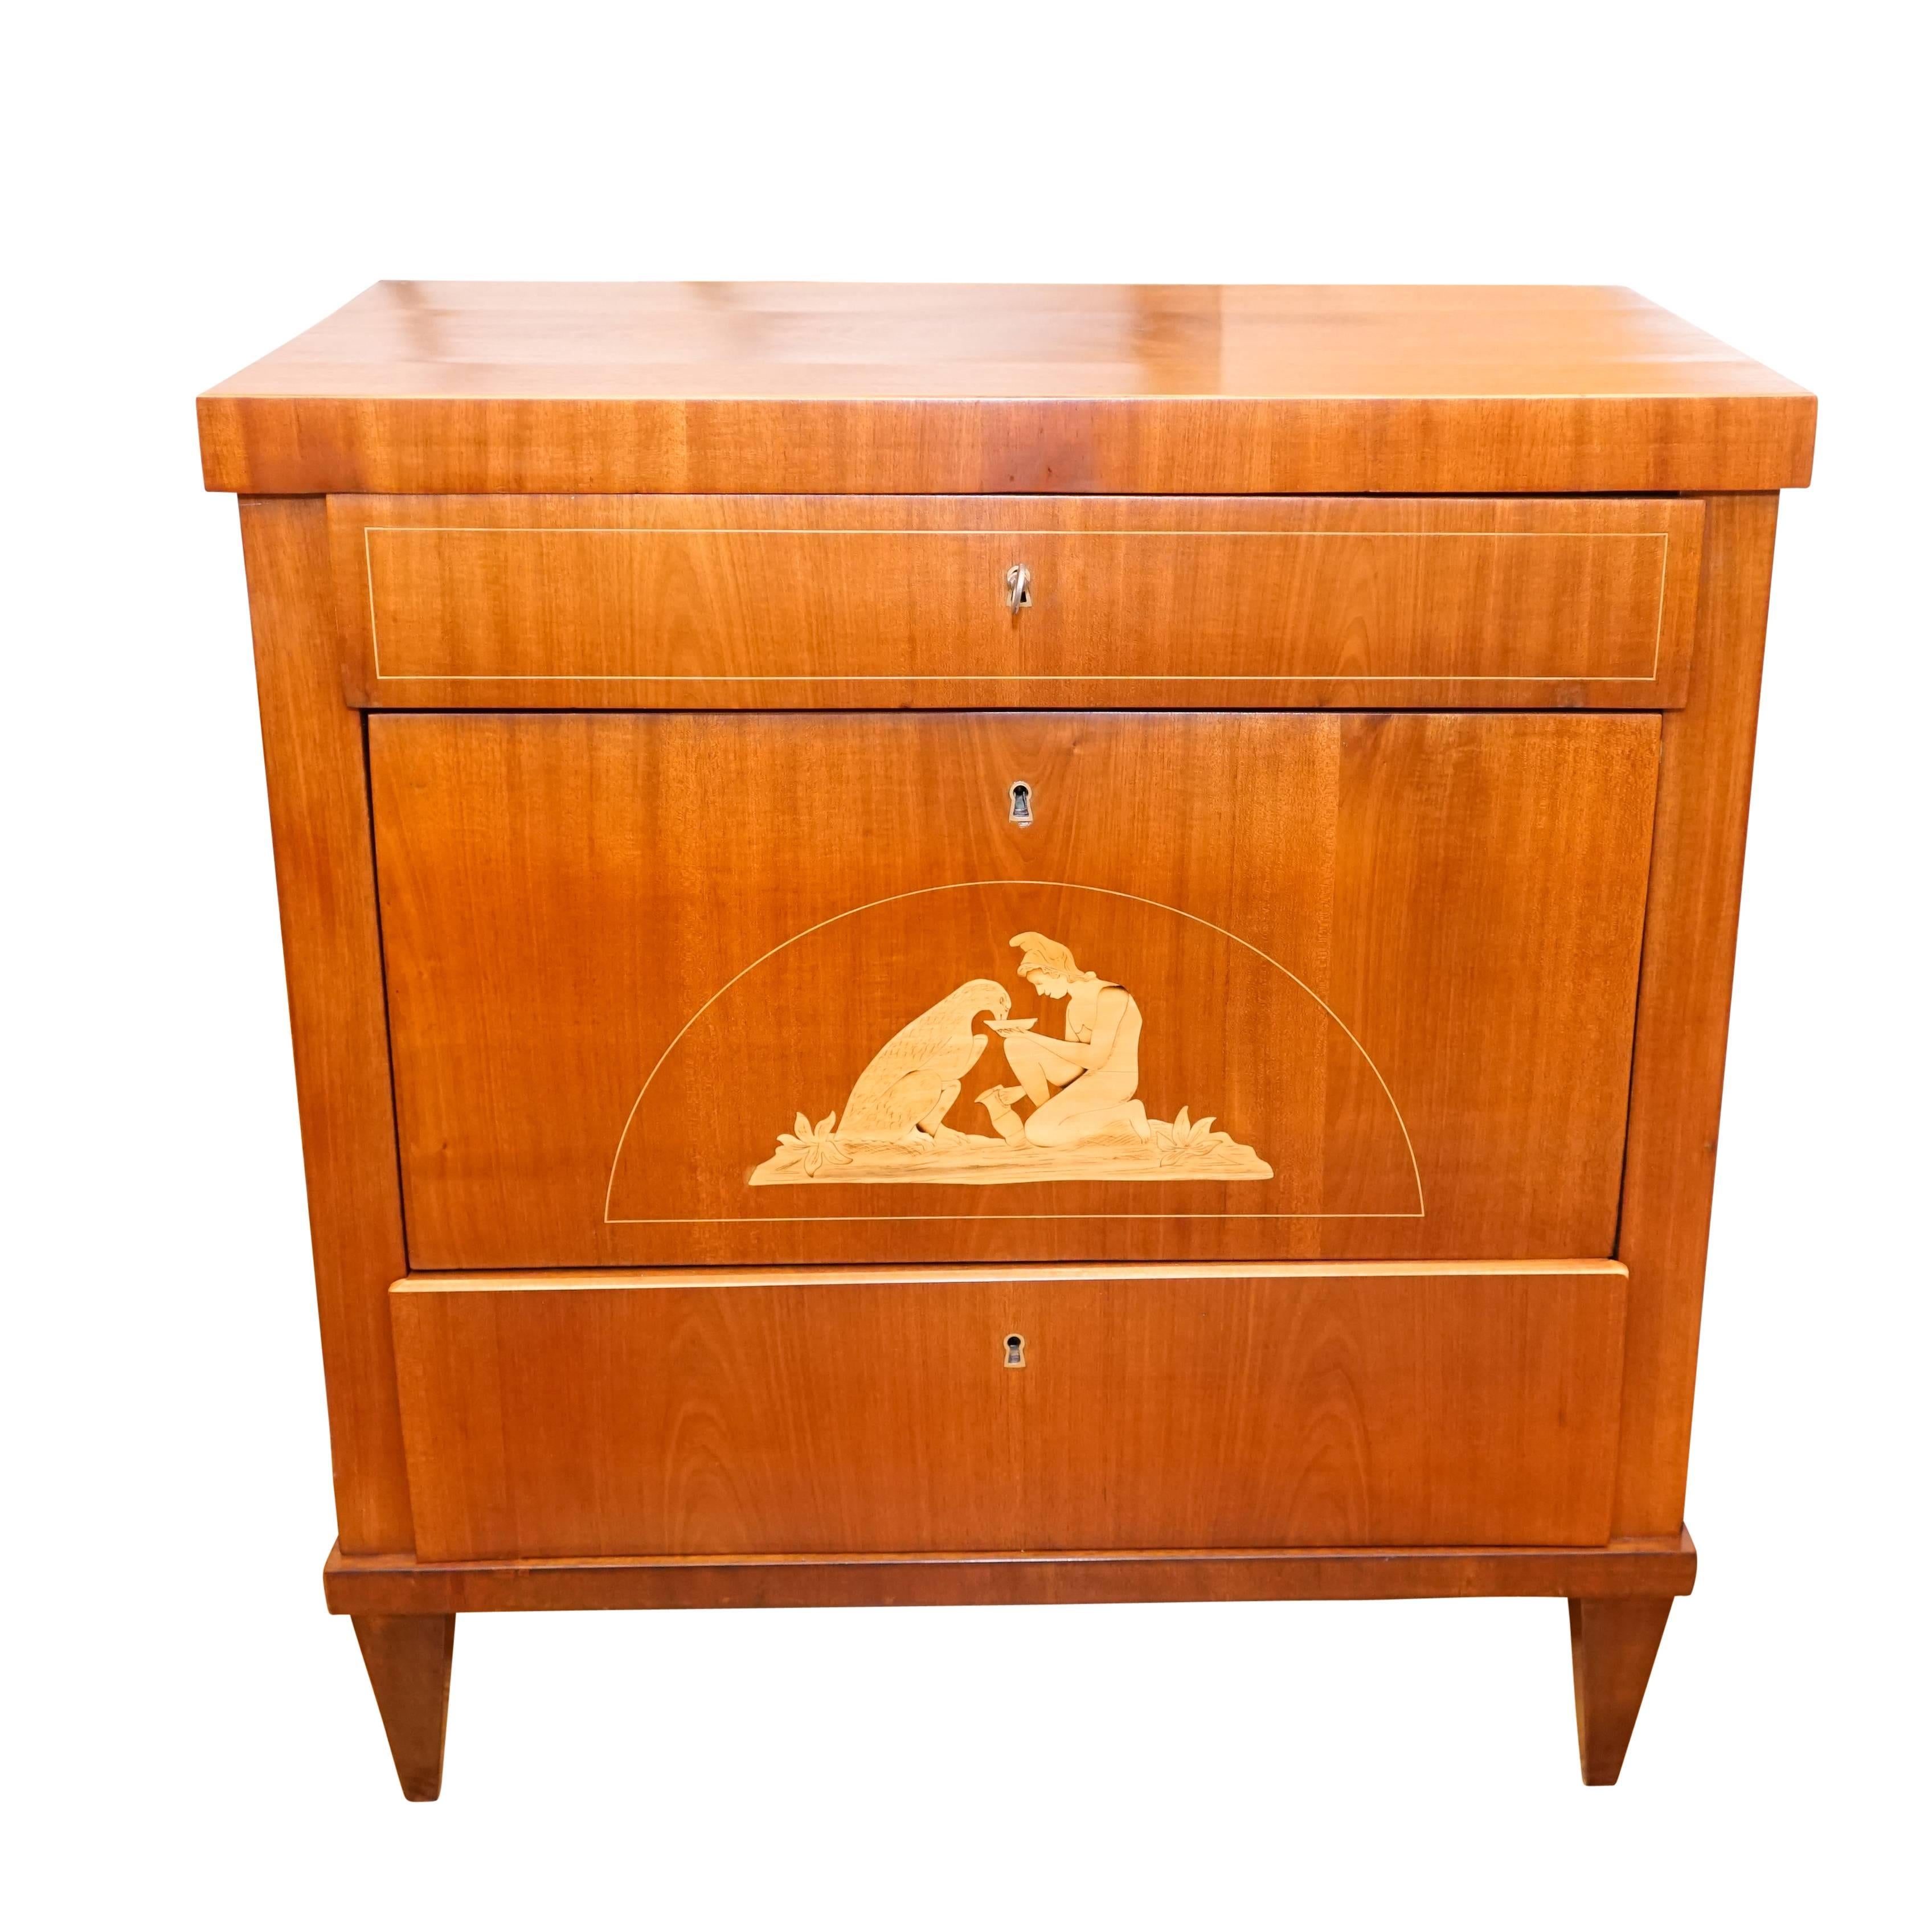 A petite chest of drawers, crafted of solid mahogany and fir, the piece is veneered with light mahogany with birch banding and marquetry. Bone escutcheons line the keyholes. The locks and keys are functioning and original.

This piece depicts the